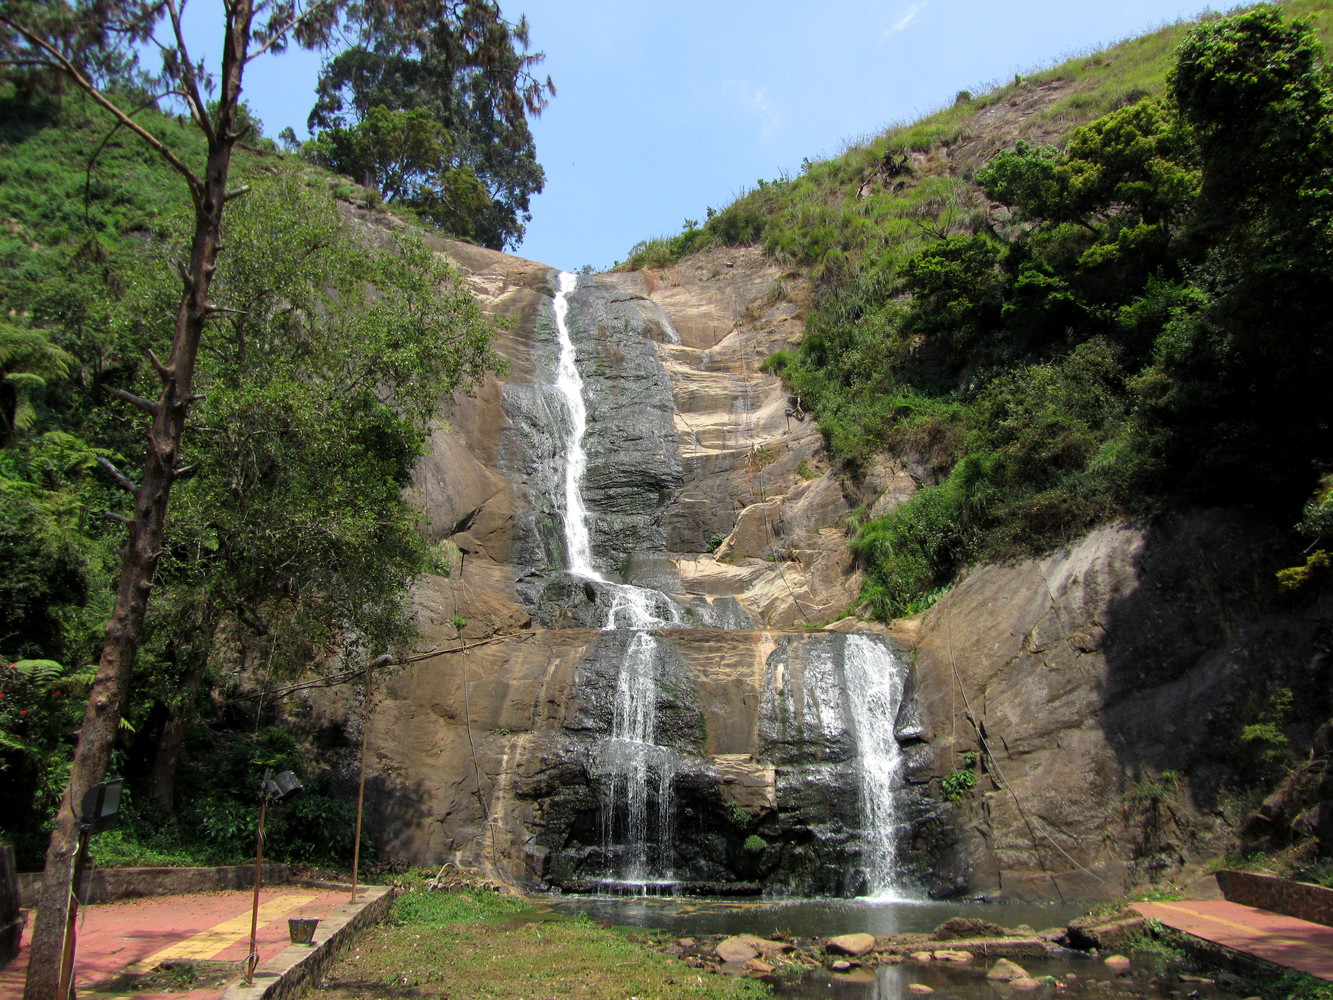 A tall waterfall with a stream of water cascanding down its rocks